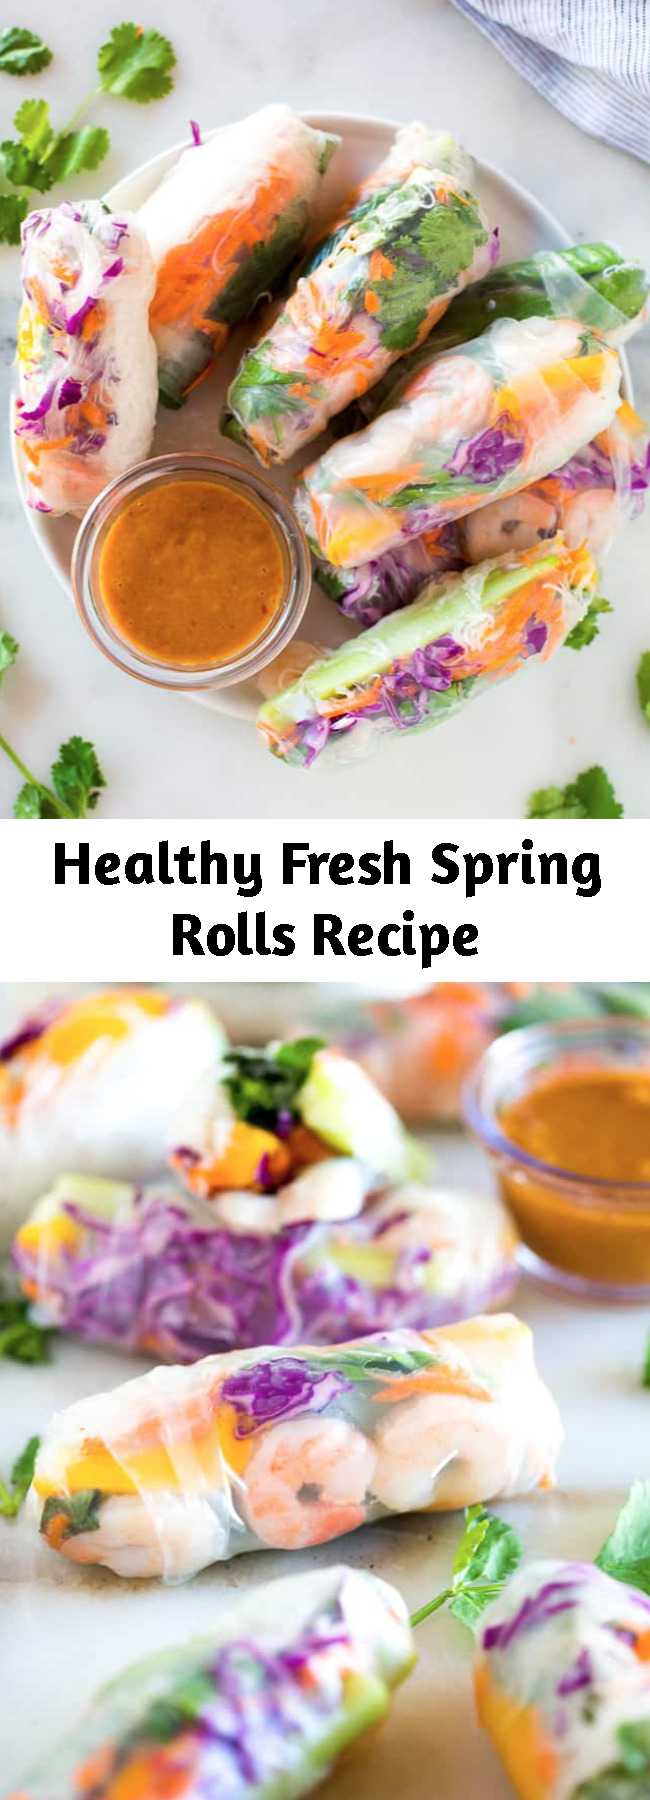 Healthy Fresh Spring Rolls Recipe - Look no further for restaurant-quality Spring Rolls that are unbelievably easy to make, delicious and healthy! These Fresh Spring Rolls are even better than you'd find at a restaurant. I like to serve them with homemade peanut sauce for dipping and they make a great light lunch, dinner or appetizer.